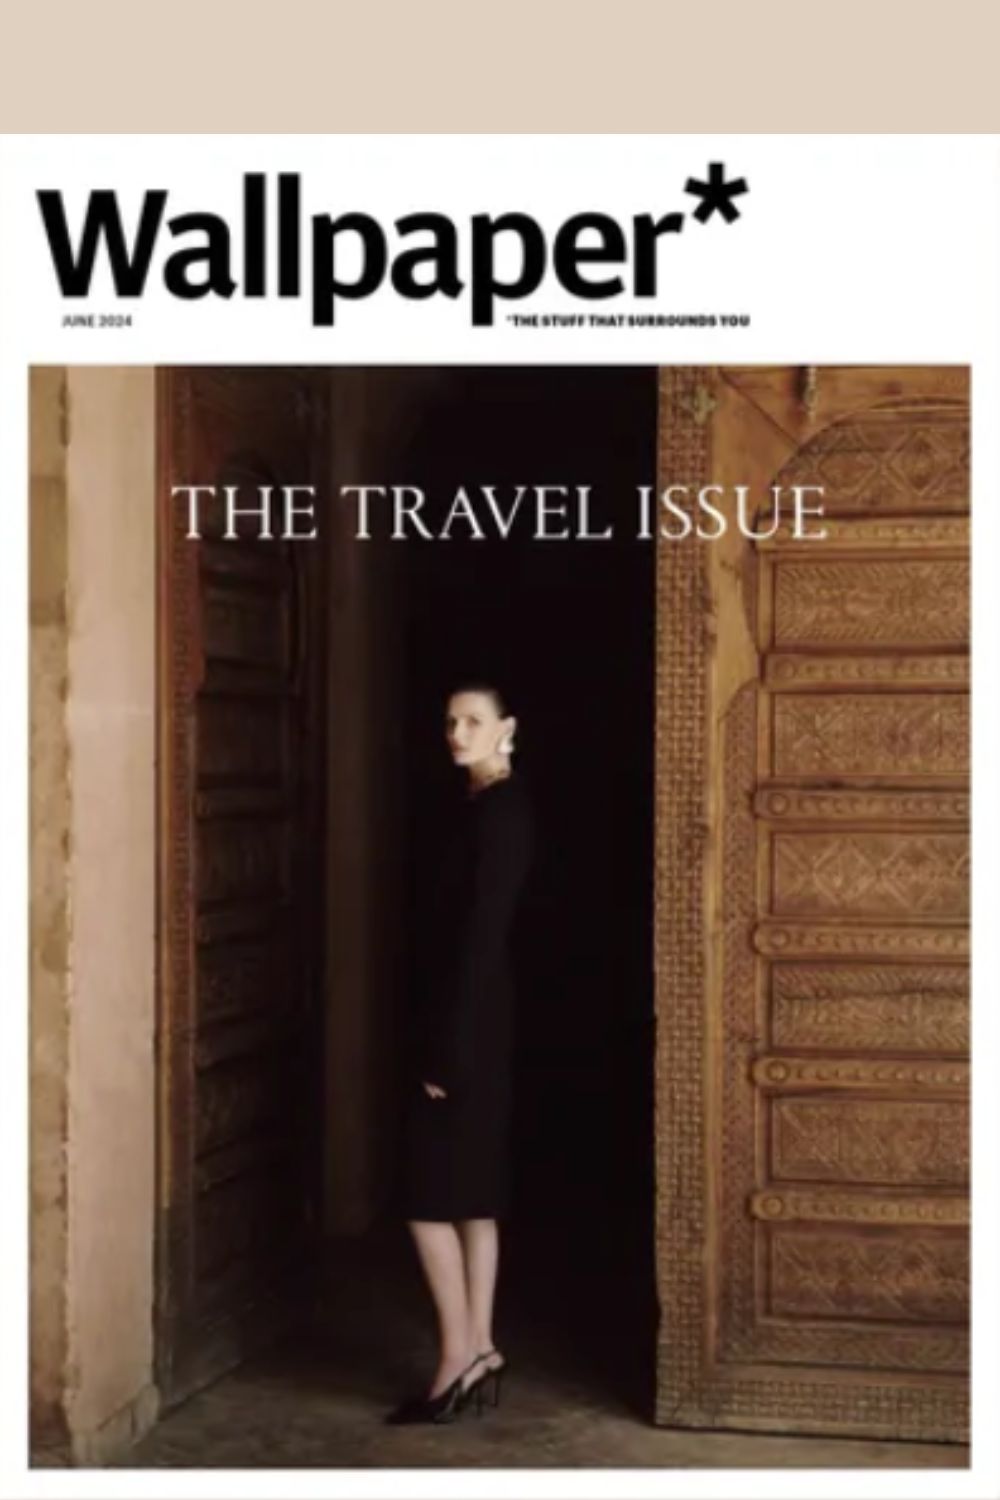 Wallpaper* Magazine cover - June 2024 &quot;The Travel Issue&quot;